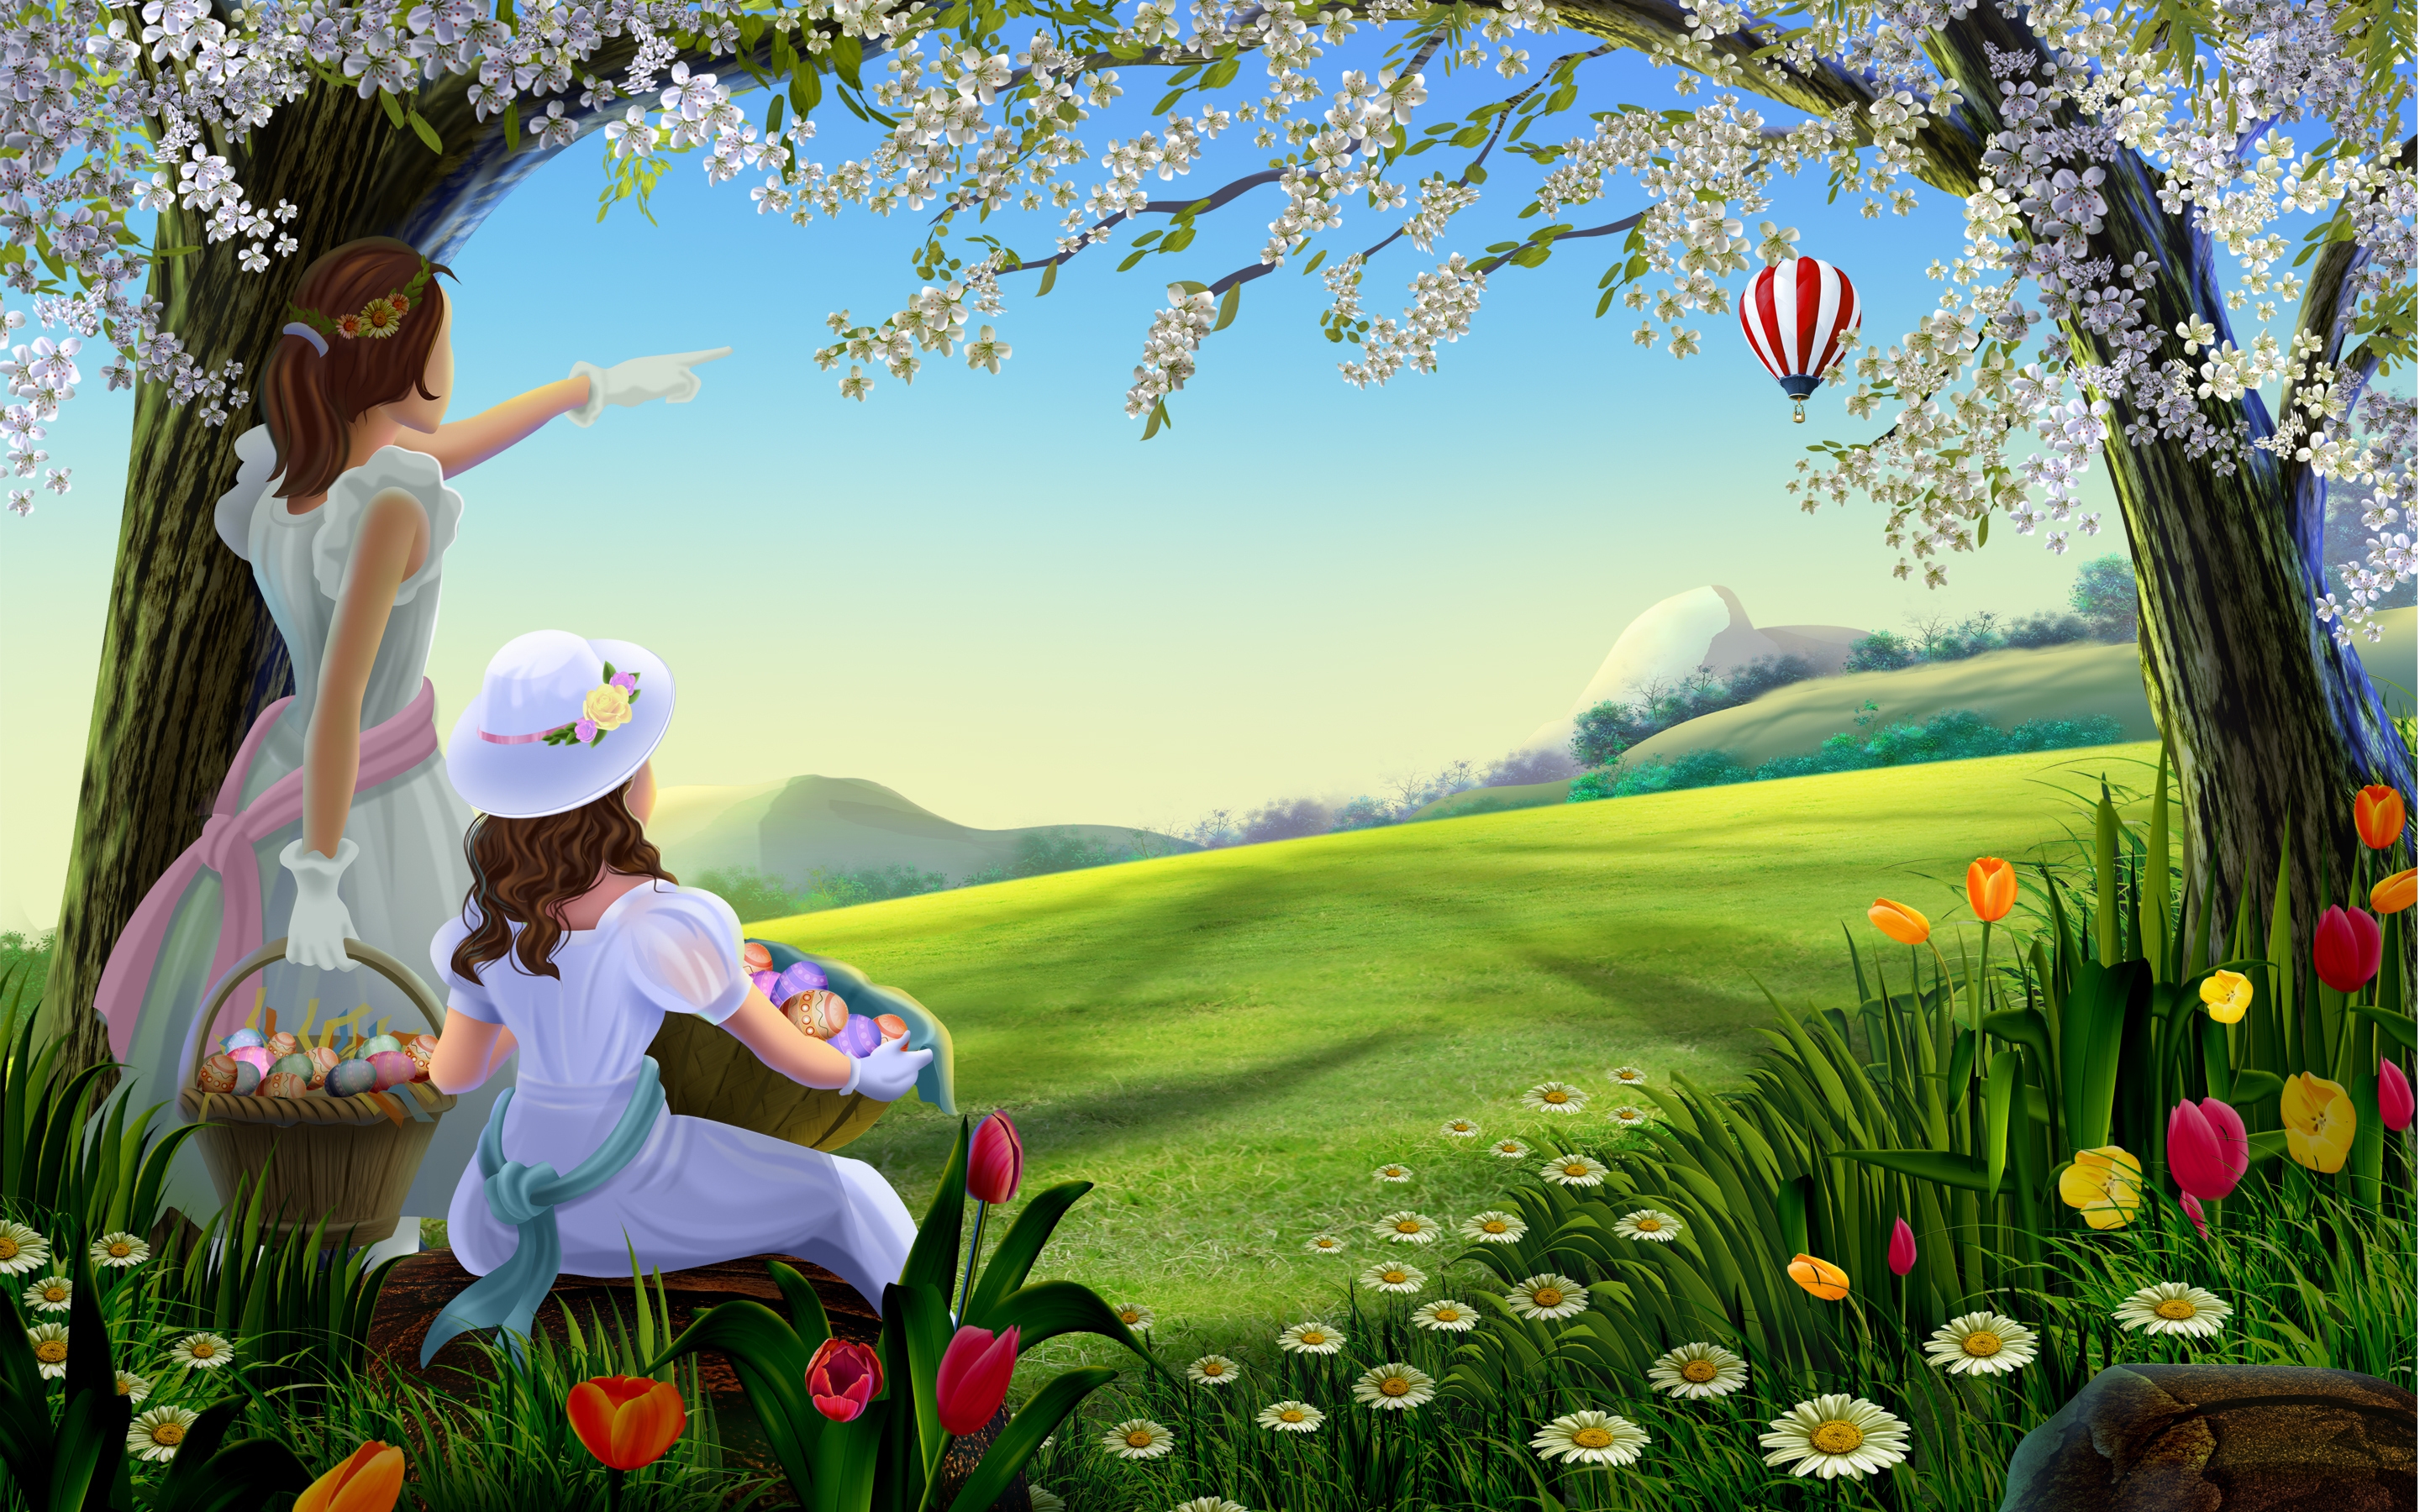 Amazing Spring Painting for 2880 x 1800 Retina Display resolution